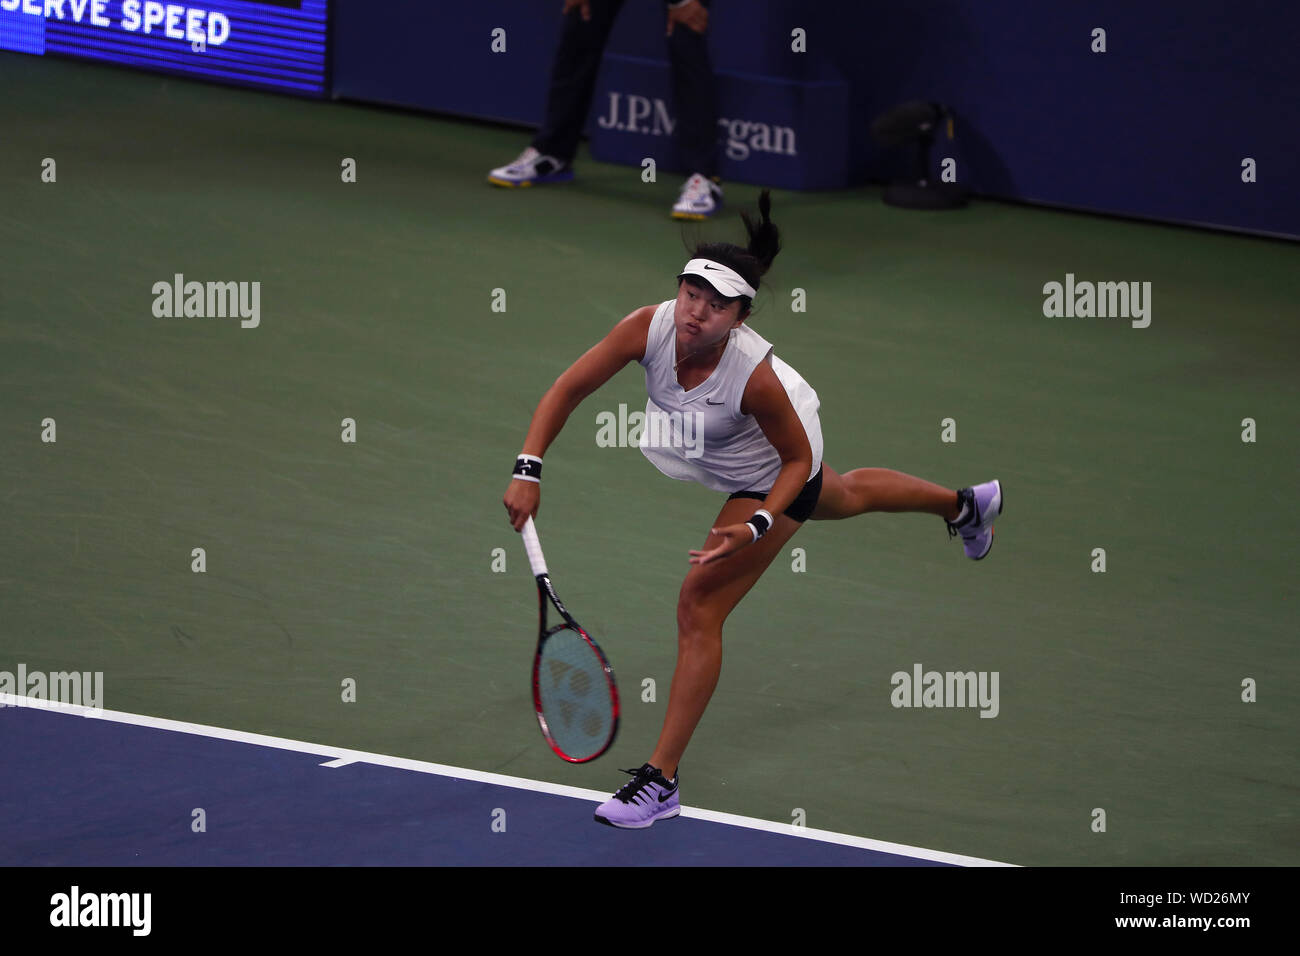 Flushing Meadows, New York, United States. 28th Aug, 2019. Lin Zhu of China serving to Madison Keys of the United States during their first round match at the US Open in Flushing Meadows, New York. Keys won the match in straight sets. Credit: Adam Stoltman/Alamy Live News Stock Photo